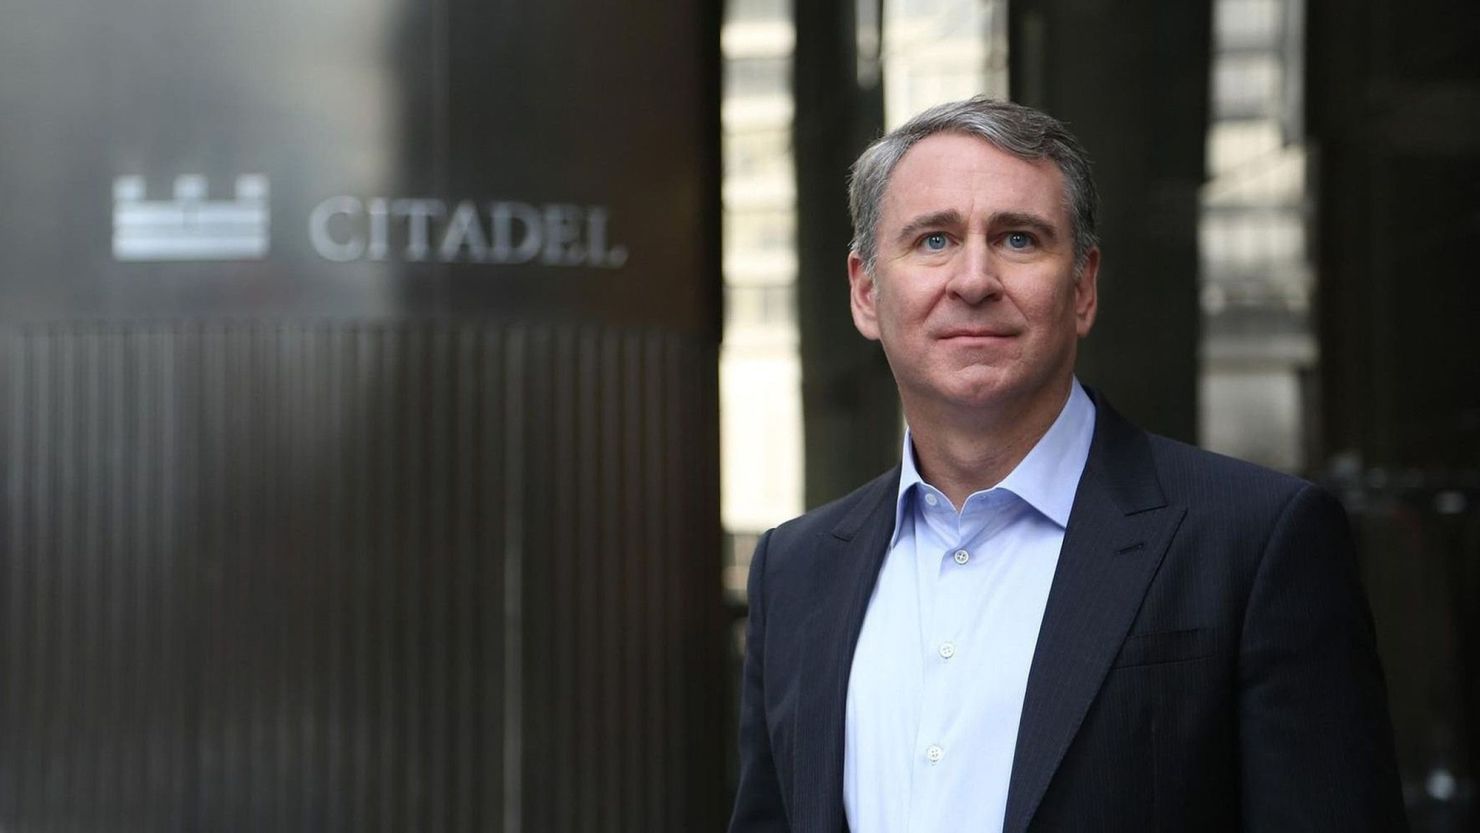 Billionaire Ken Griffin, founder of hedge fund Citadel, said he is no longer supporting Harvard financially.